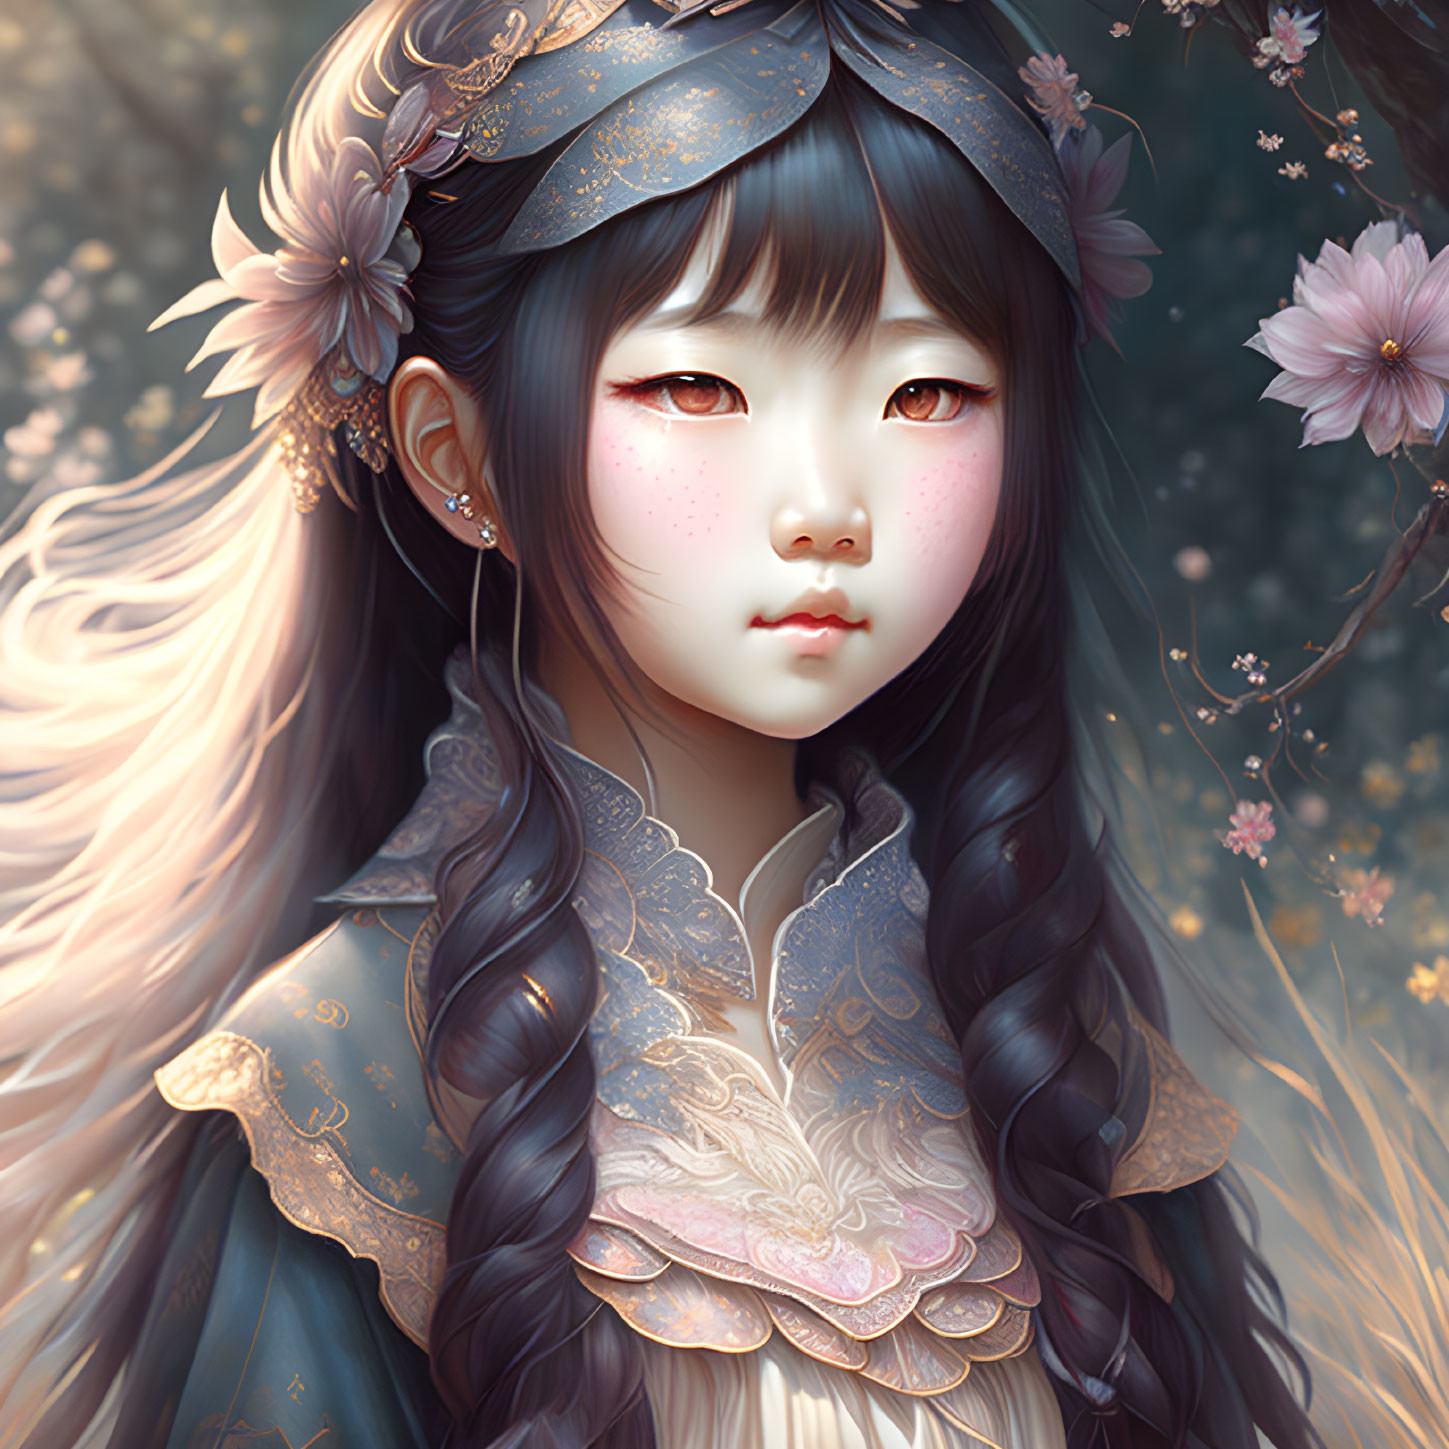 Detailed illustration of girl with expressive eyes and decorative headpiece amidst delicate flowers.